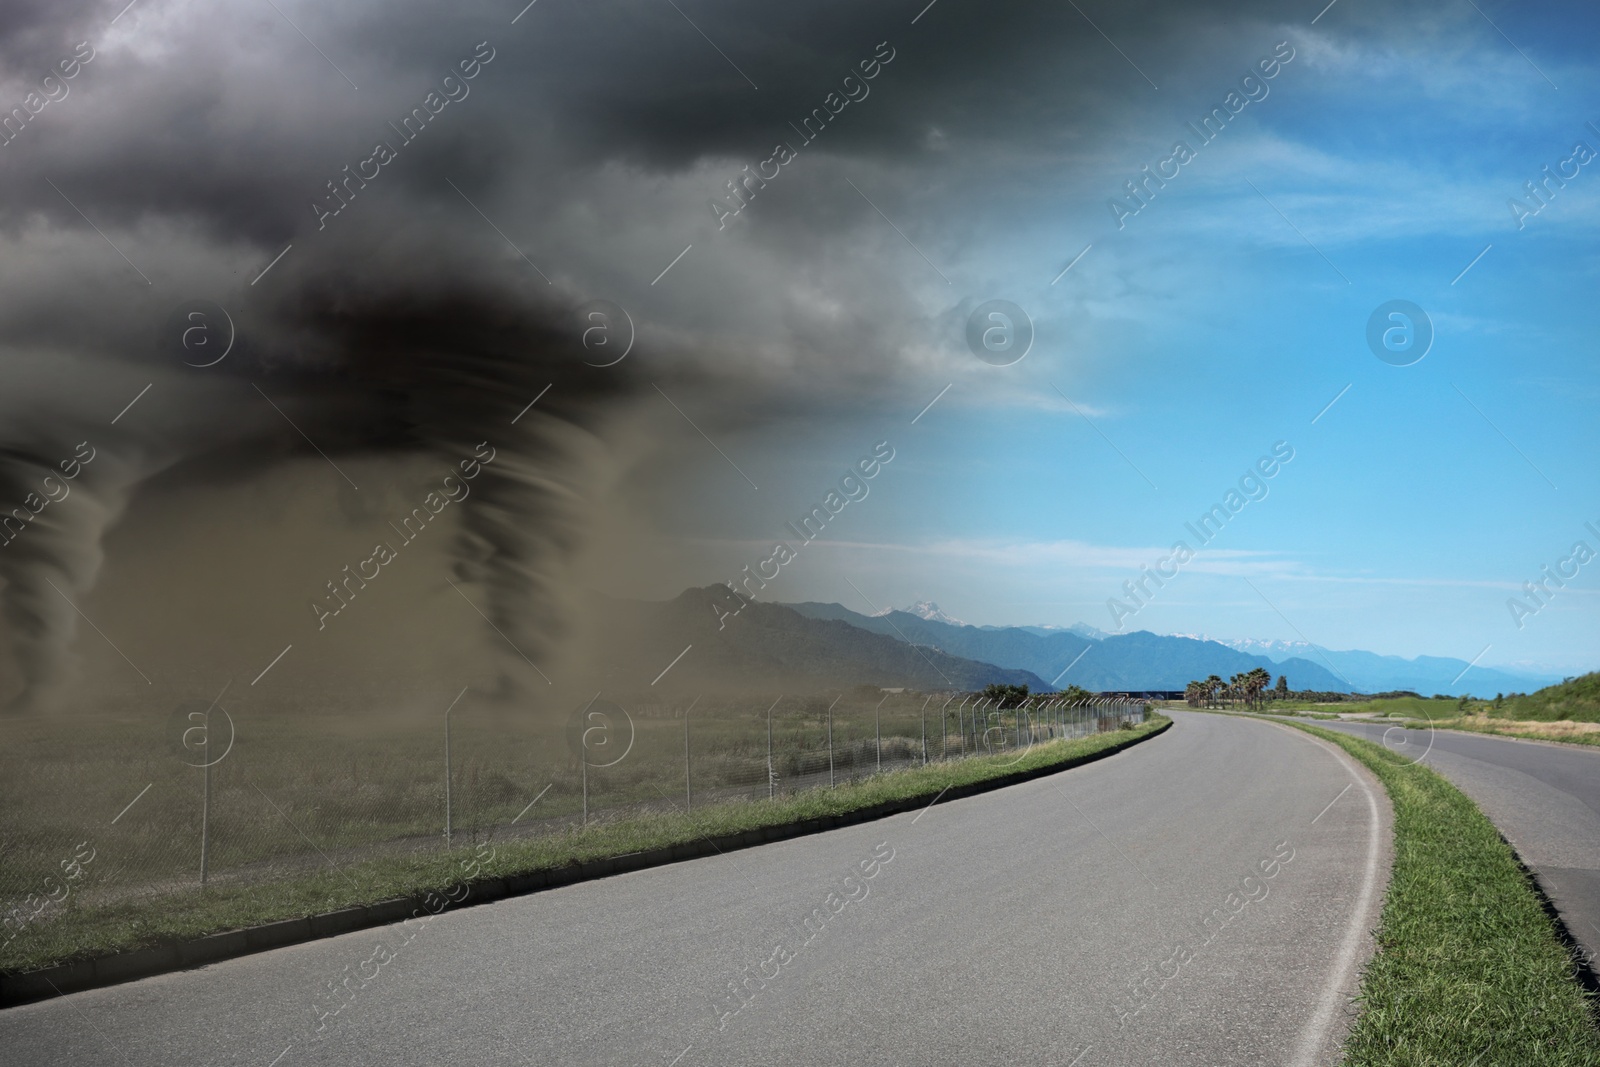 Image of Collage with mountain landscape during sunny day on one side and coming tornadoes on other. Weather changes